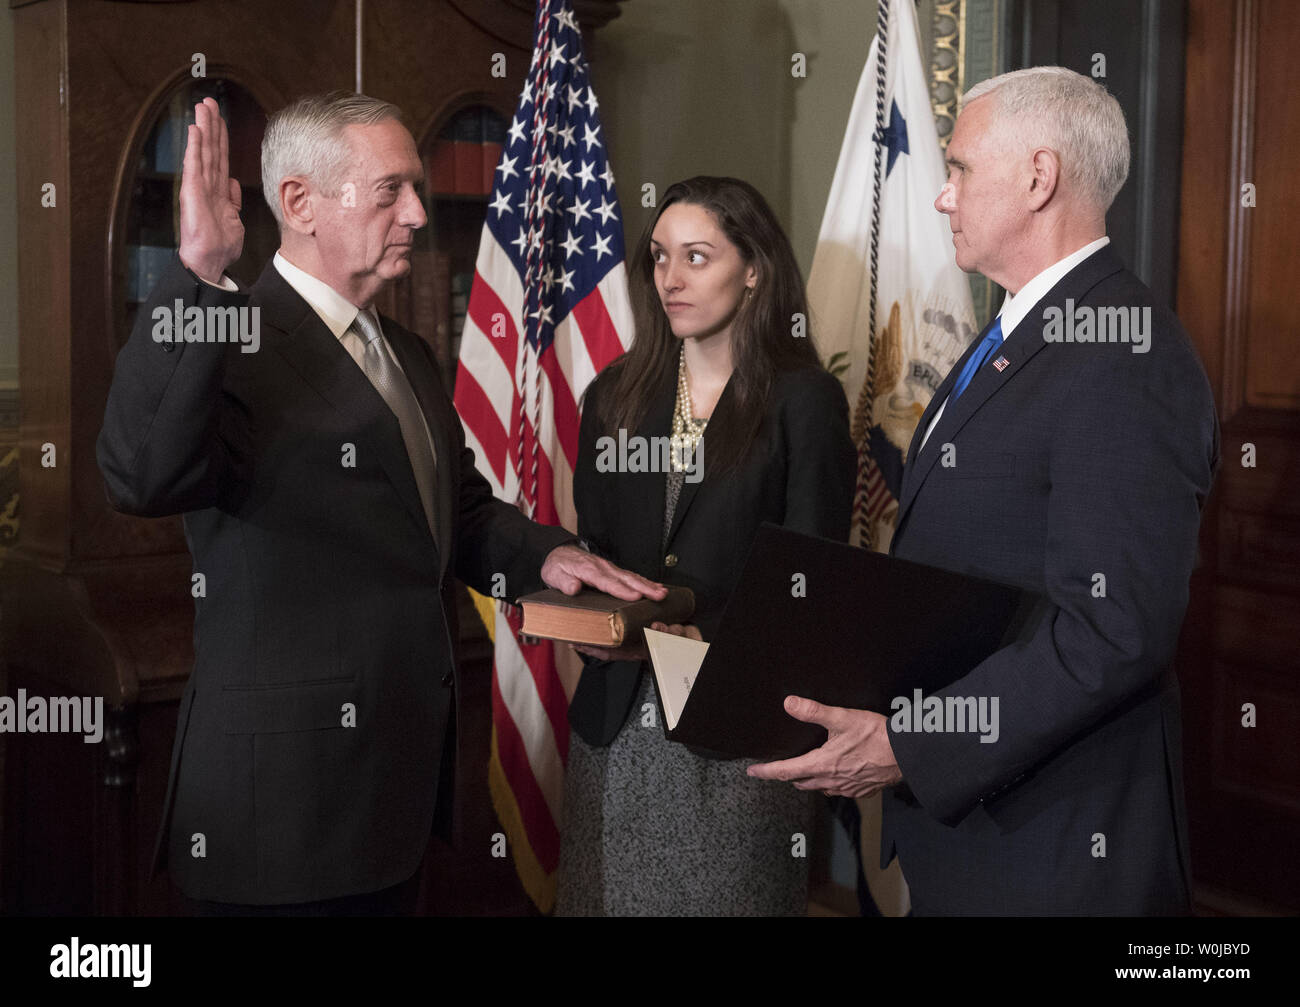 Marine Corps General James Mattis is sworn-in as Defense Secretary by Vice President Mike Pence, in the Vice Presidential ceremonial office in the Executive Office Building in Washington, D.C. on January 20, 2017. Photo by Kevin Dietsch/UPI Stock Photo